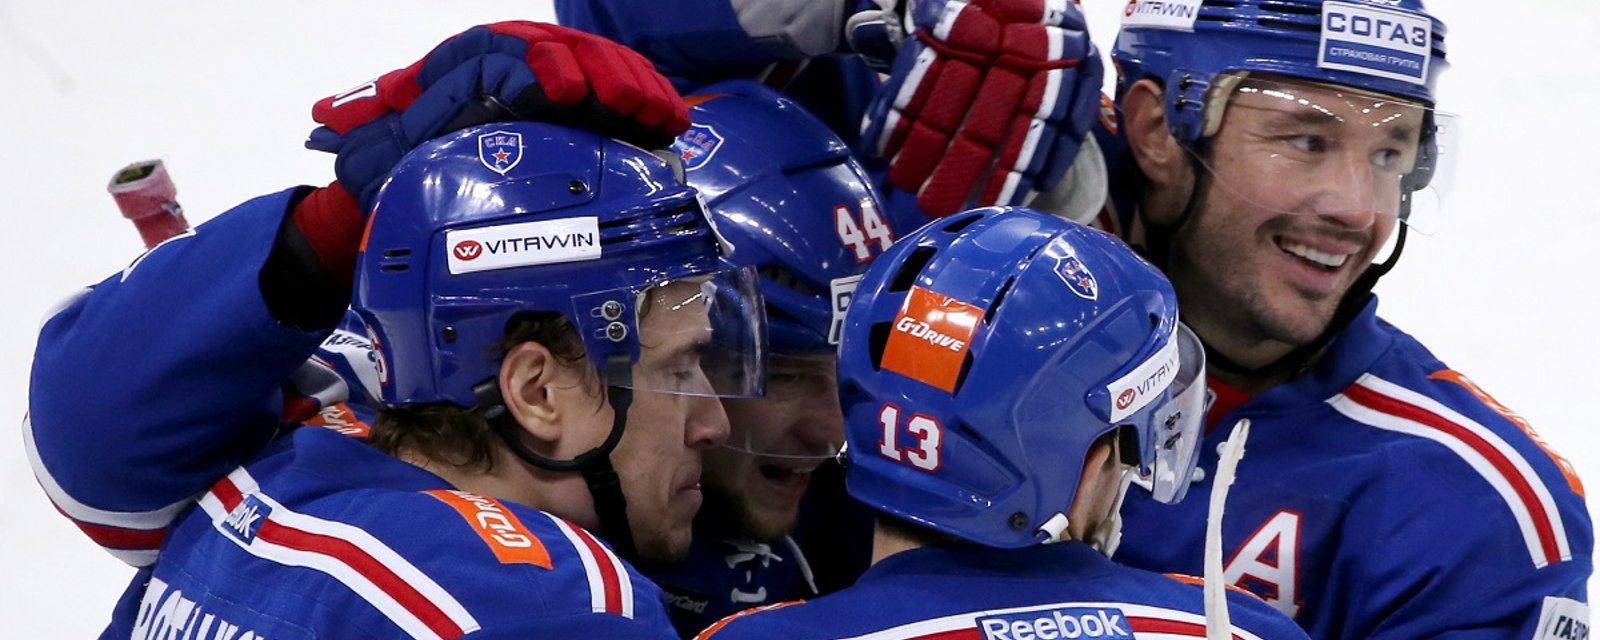 KHL superstar drops hints about coming to the NHL.